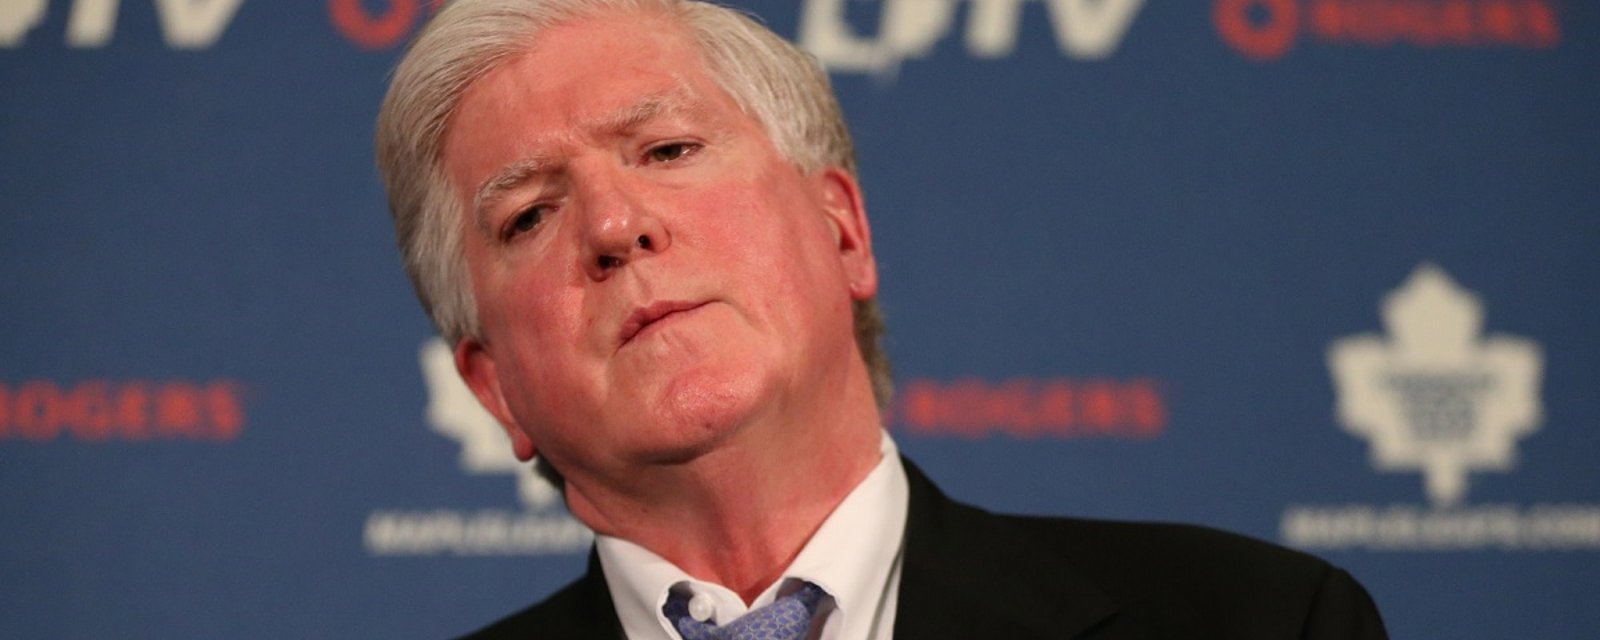 Brian Burke explains how an offer sheet nearly led to a fist fight between NHL GMs.